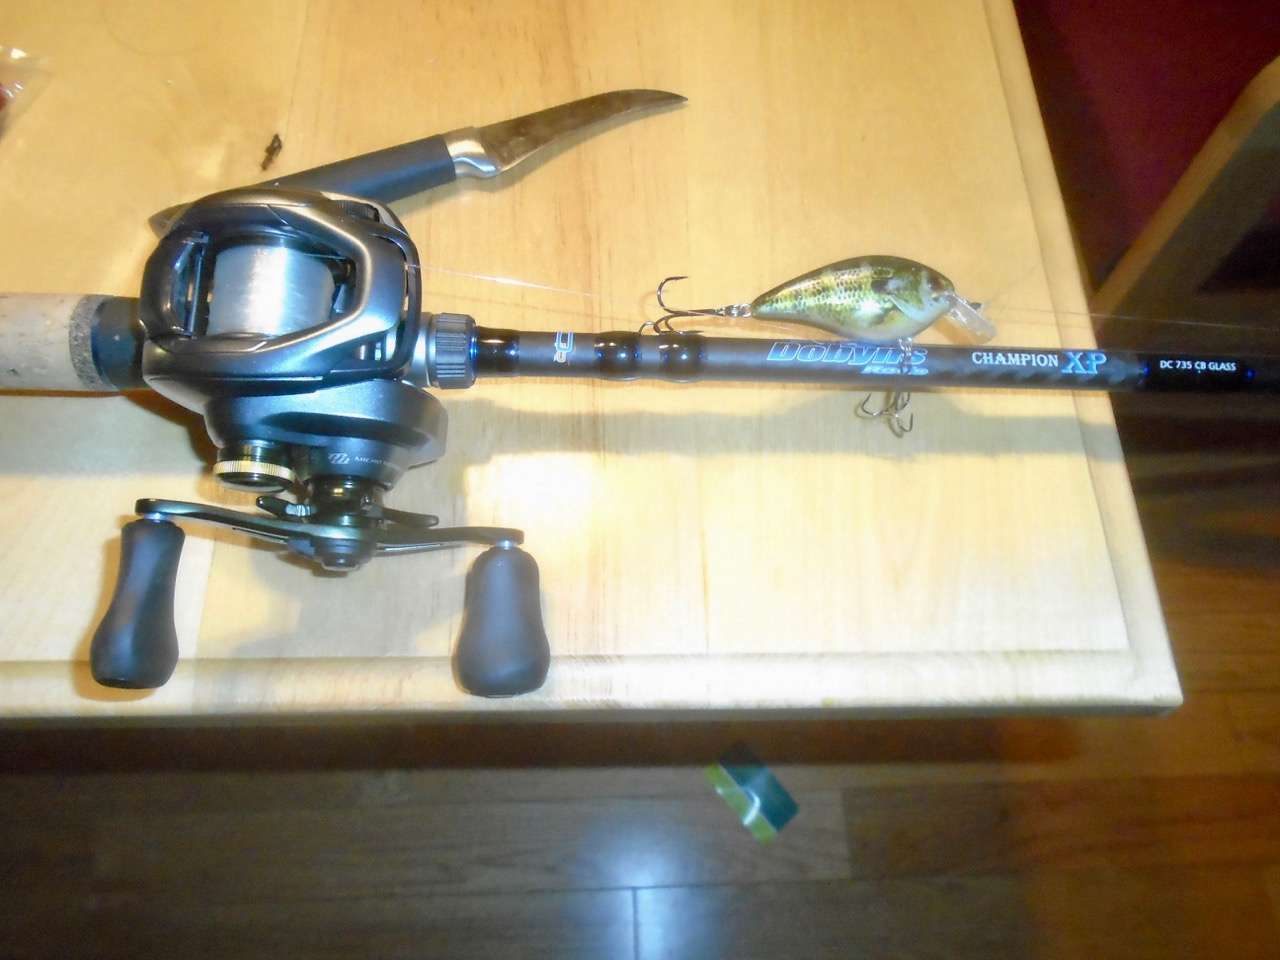 I was gifted this Curado 151 DC a few years ago. Like all Curado's I own  it's been a solid workhorse bass fishing reel. Would I buy o